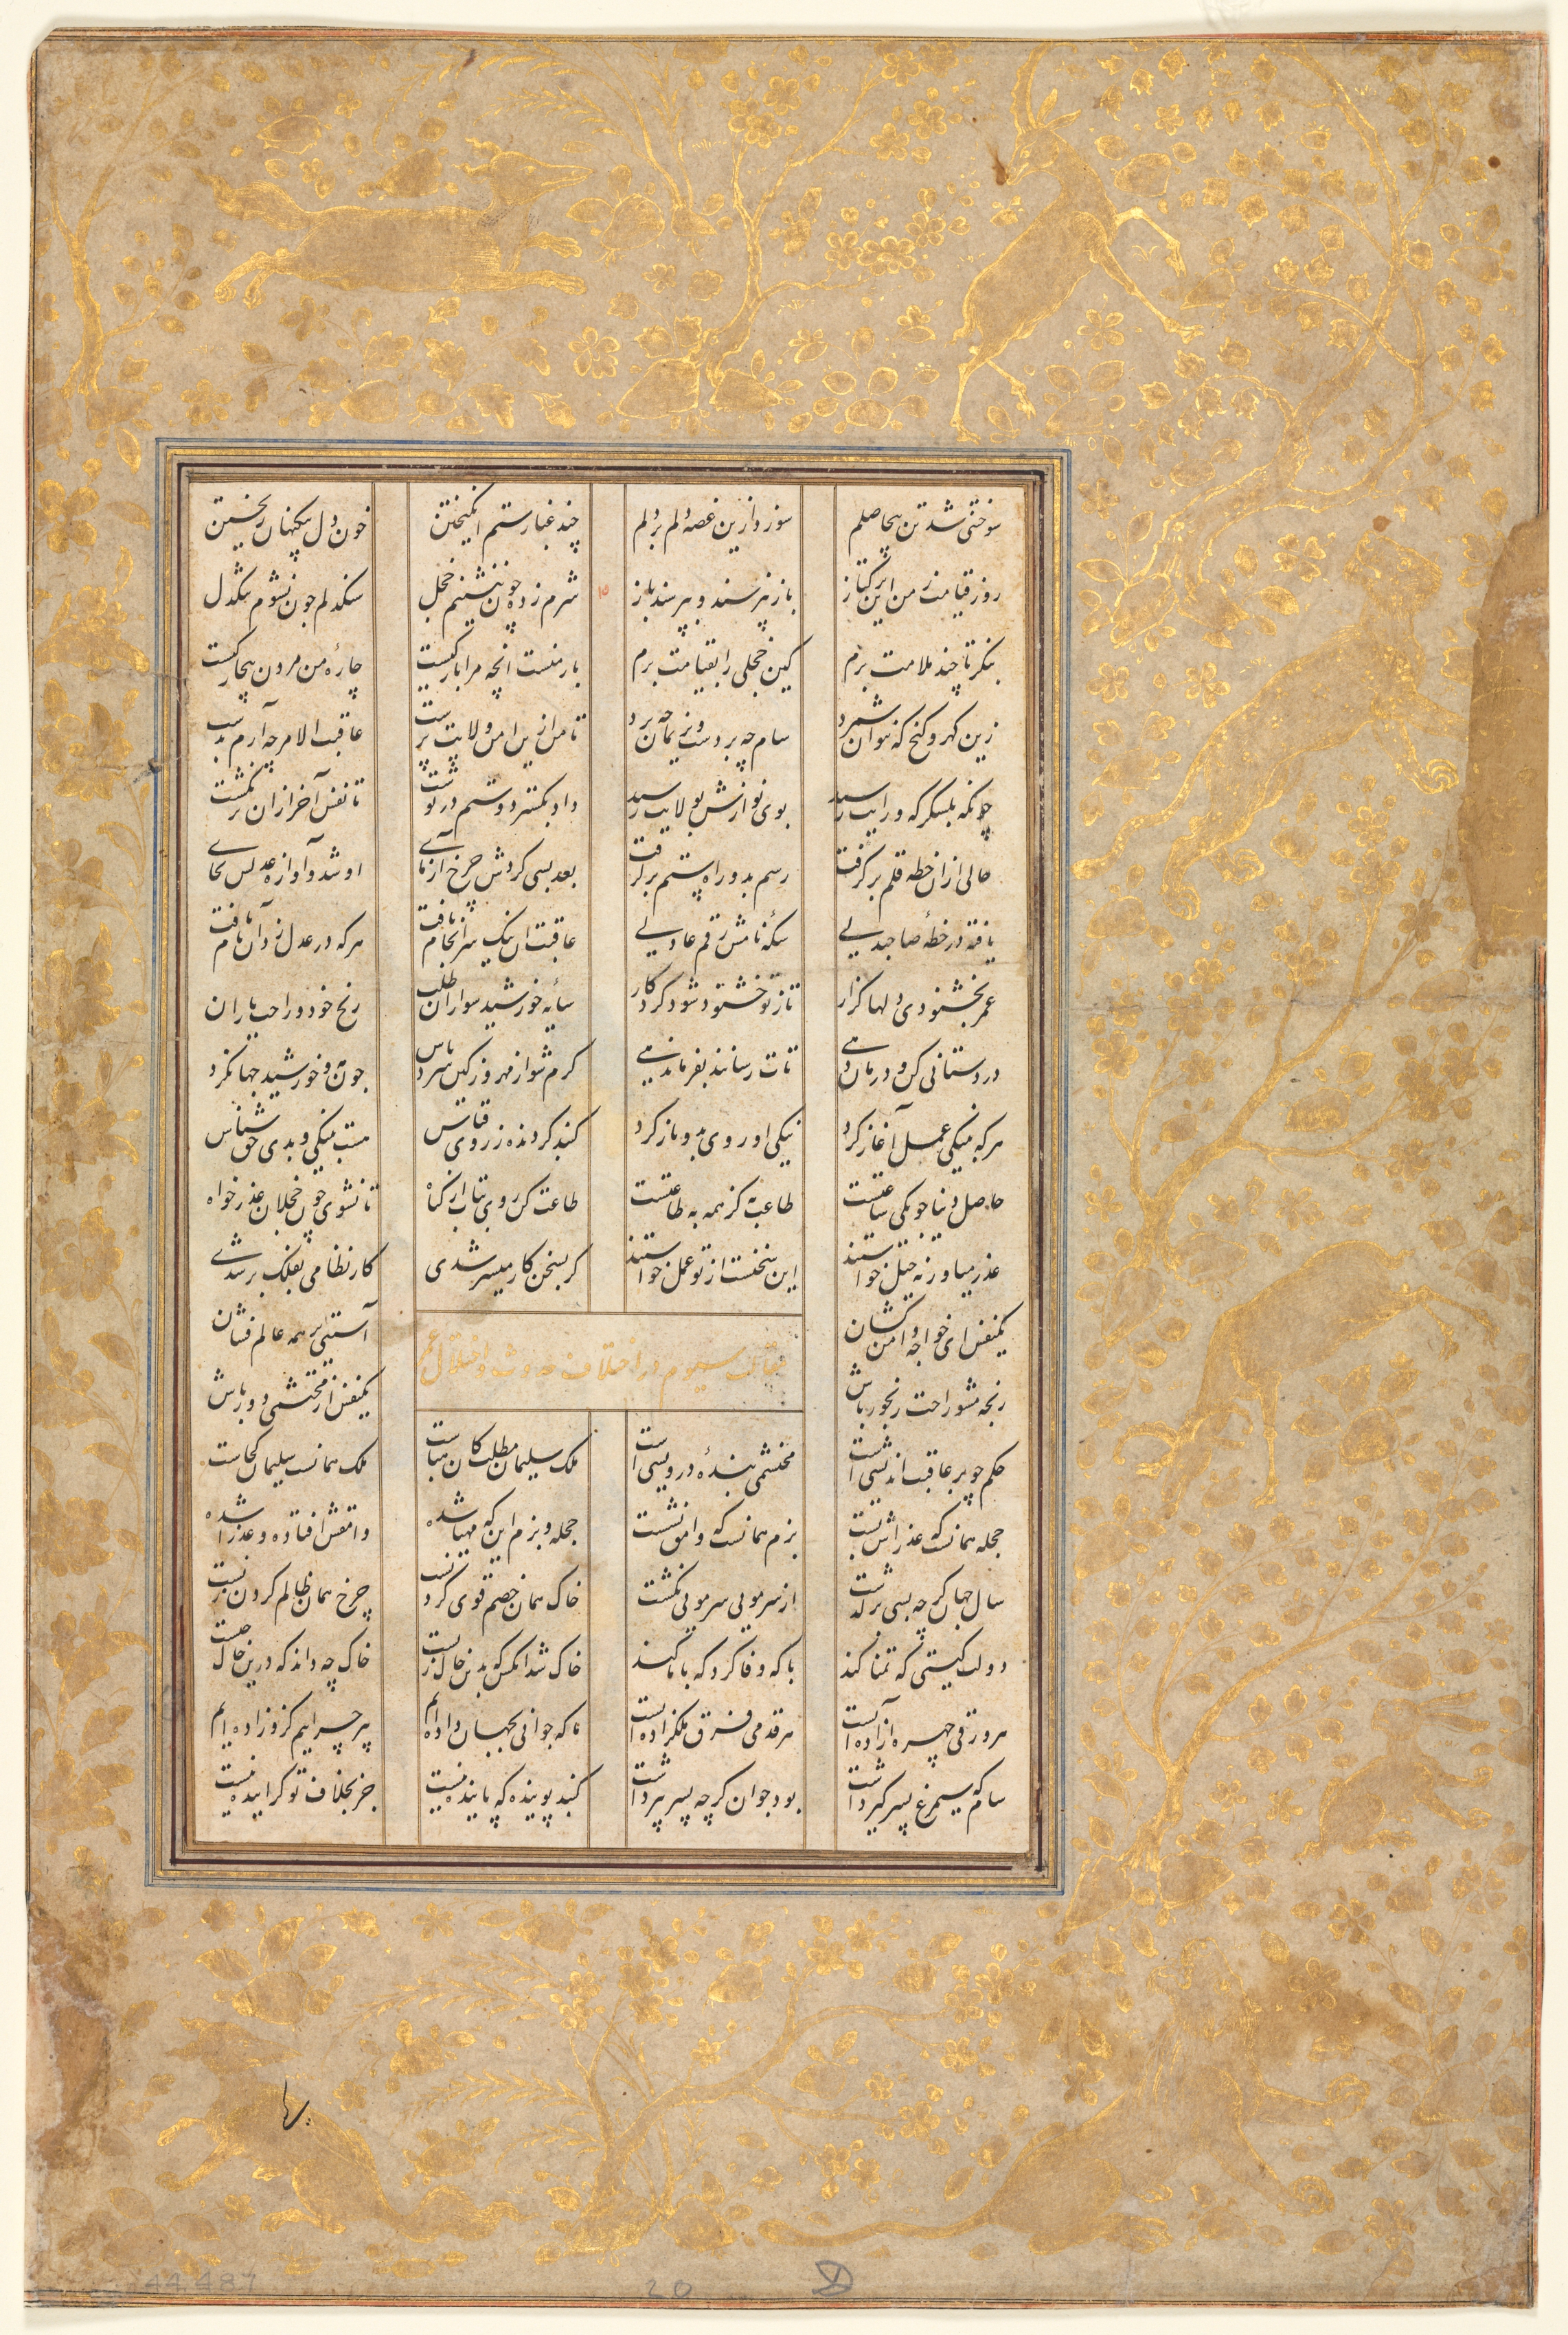 The Story of Nushirwan and his Minister, "The Third Discourse on Diverse Events and Disorder in Life" from a  Khamsa (Quintet) of Nizami (1141-1209) (verso)